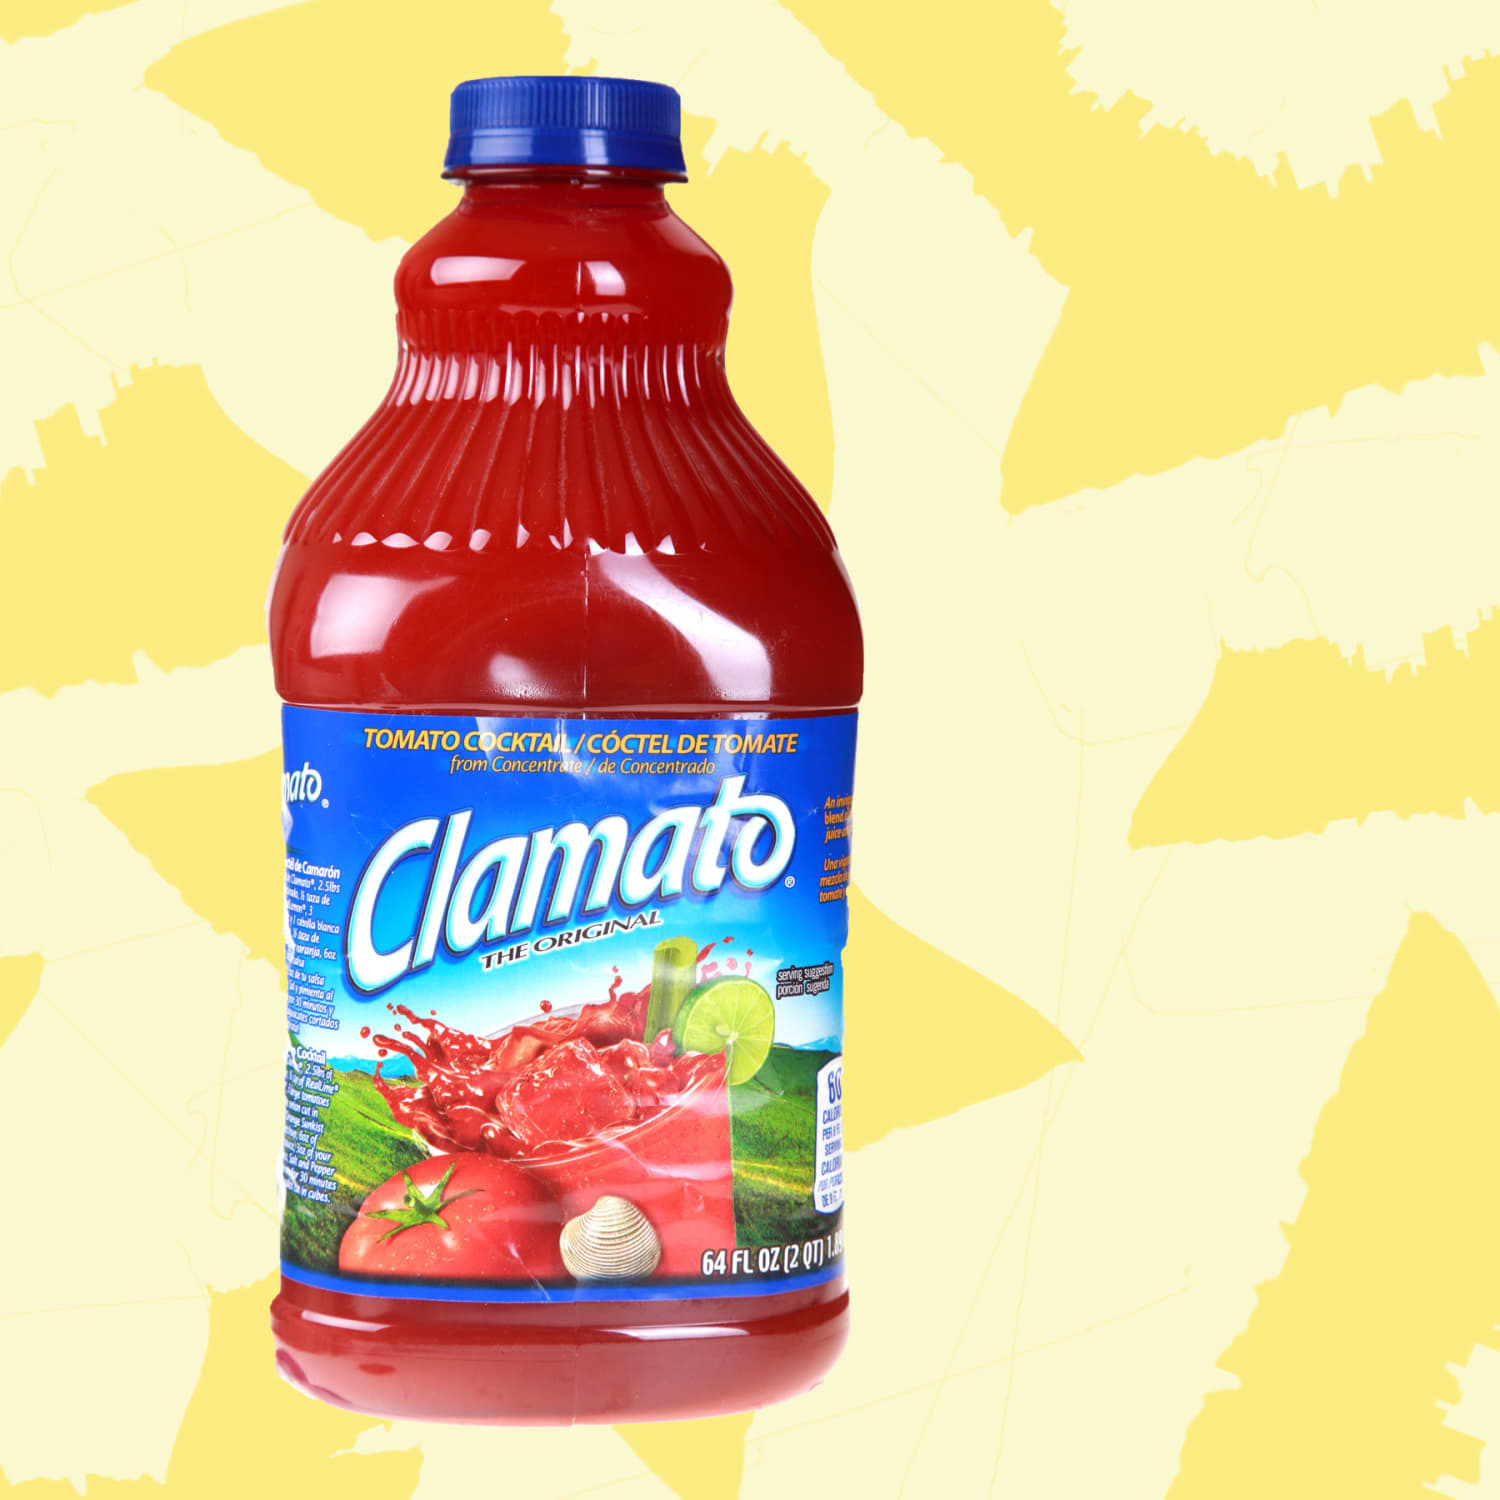 Is Clamato Juice Good for You?